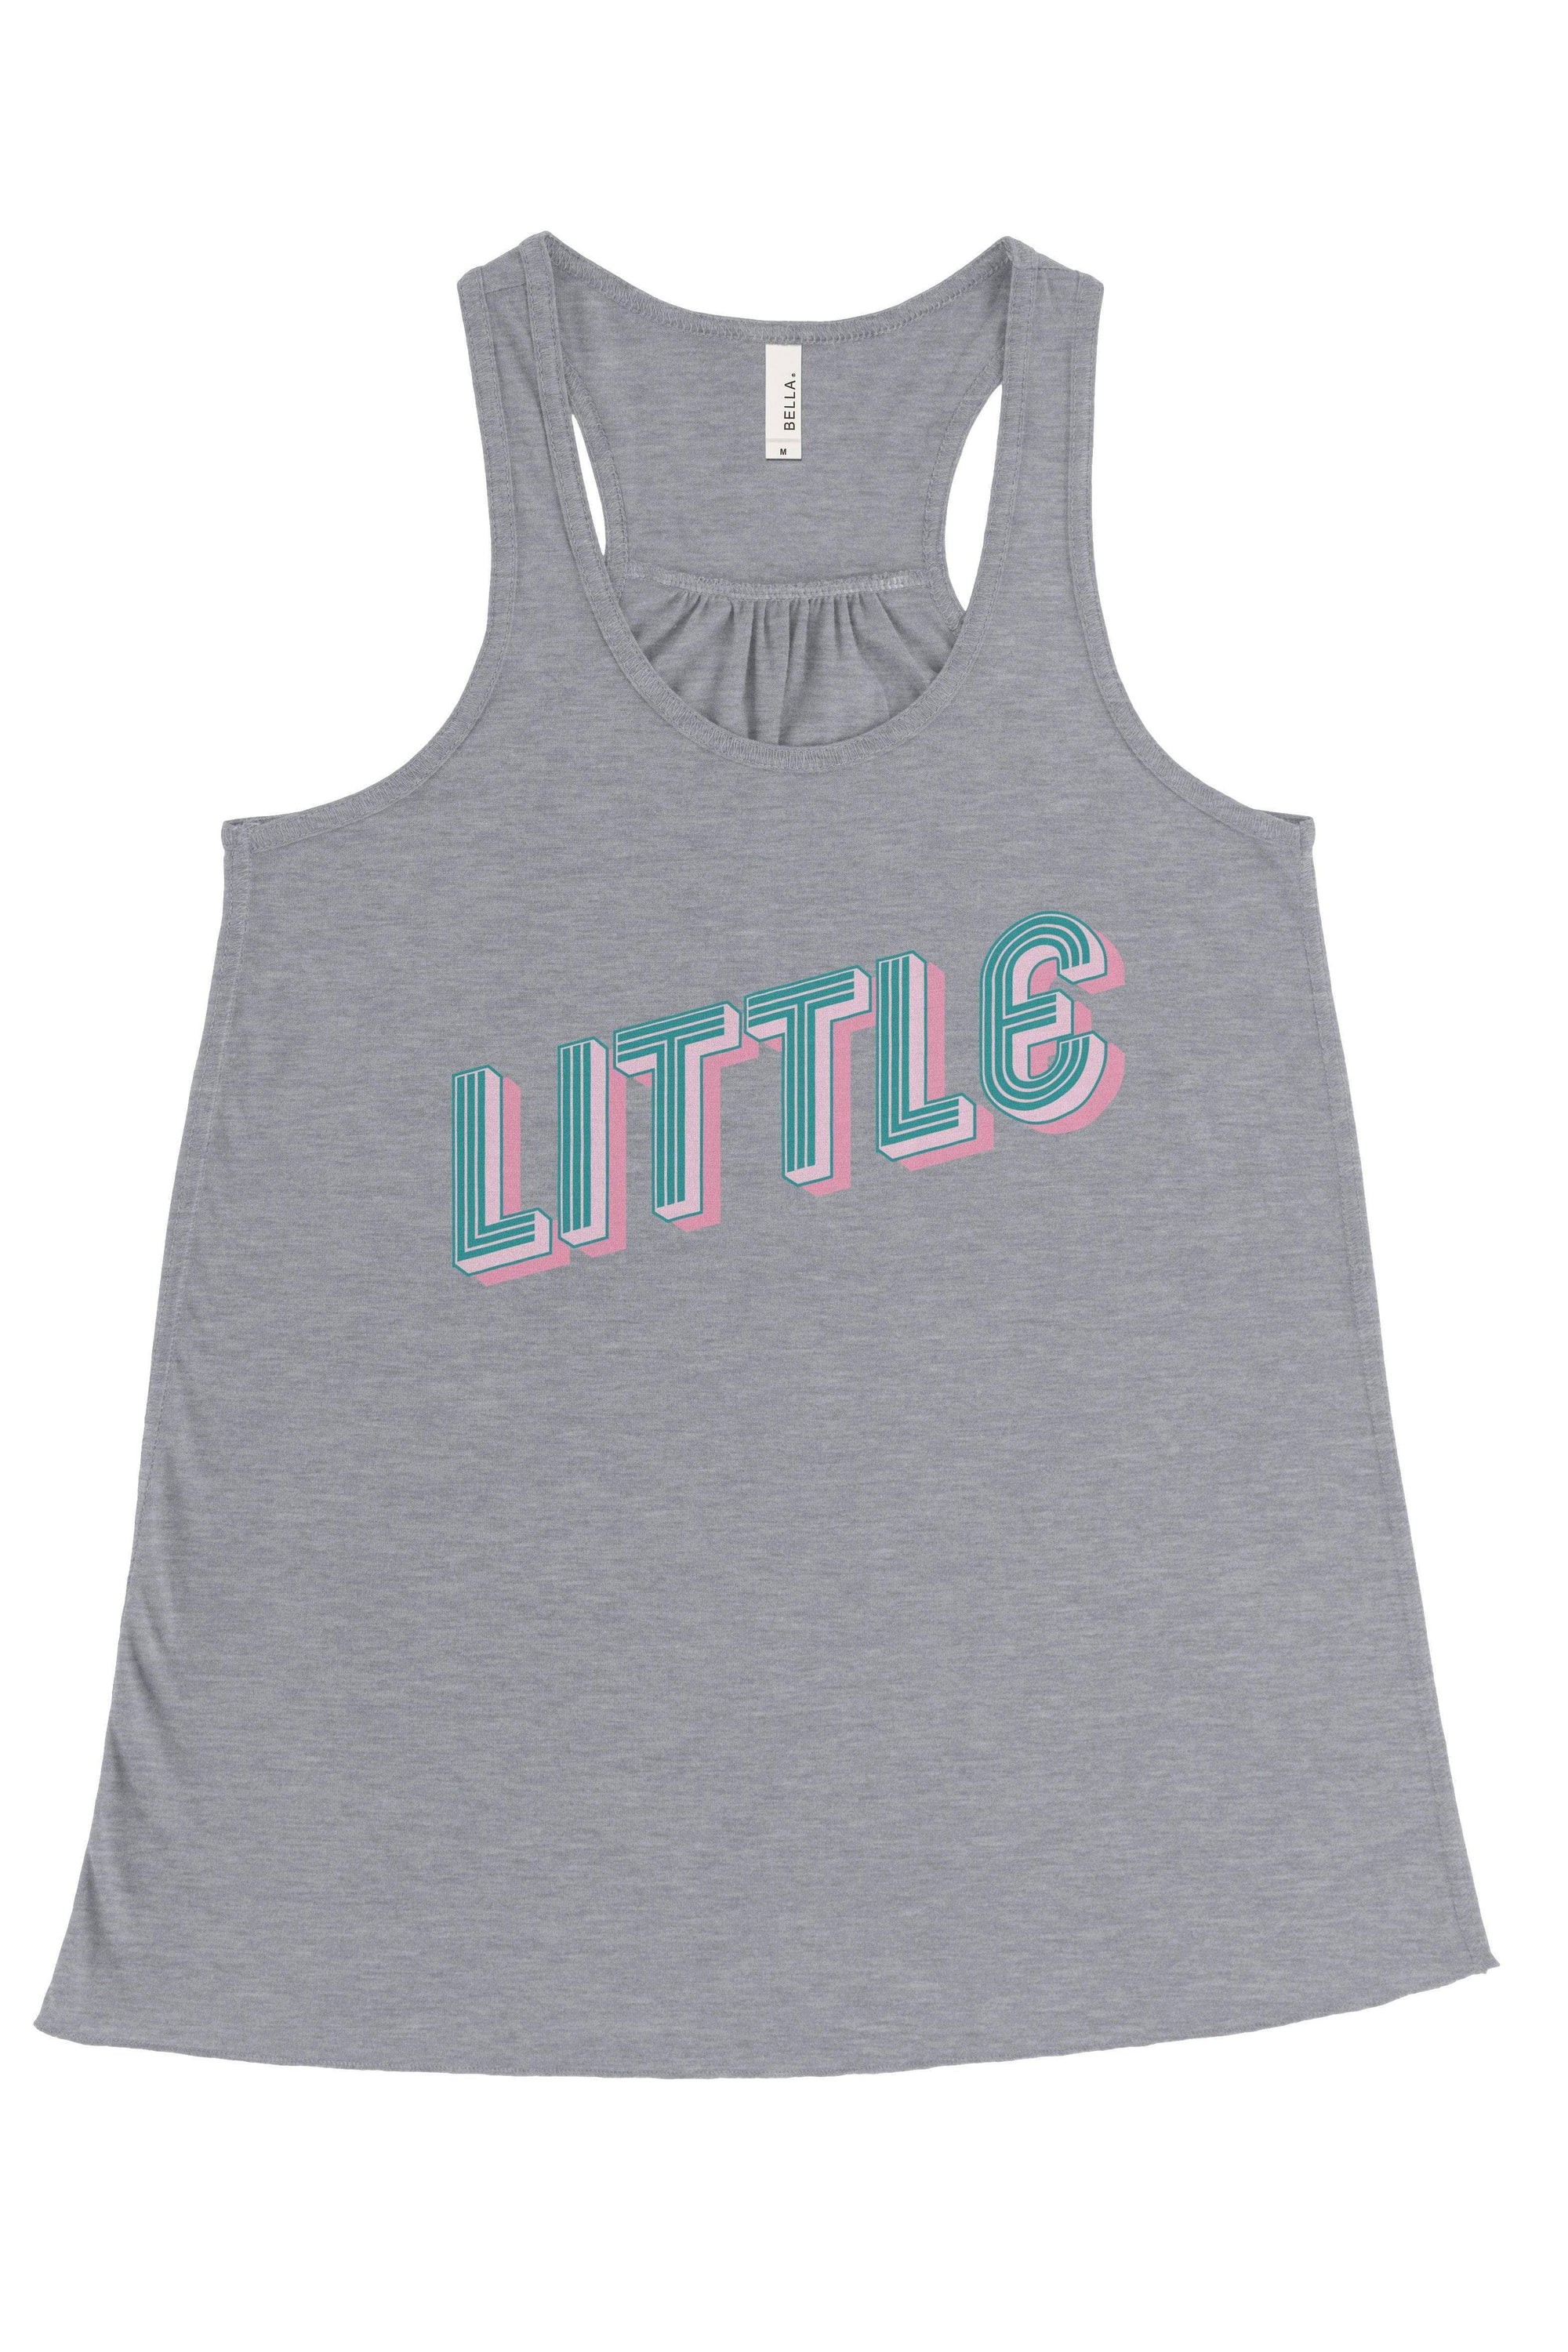 Pink and Blue Neon Sign Big Little Bella Canvas Flowy Racerback Tank